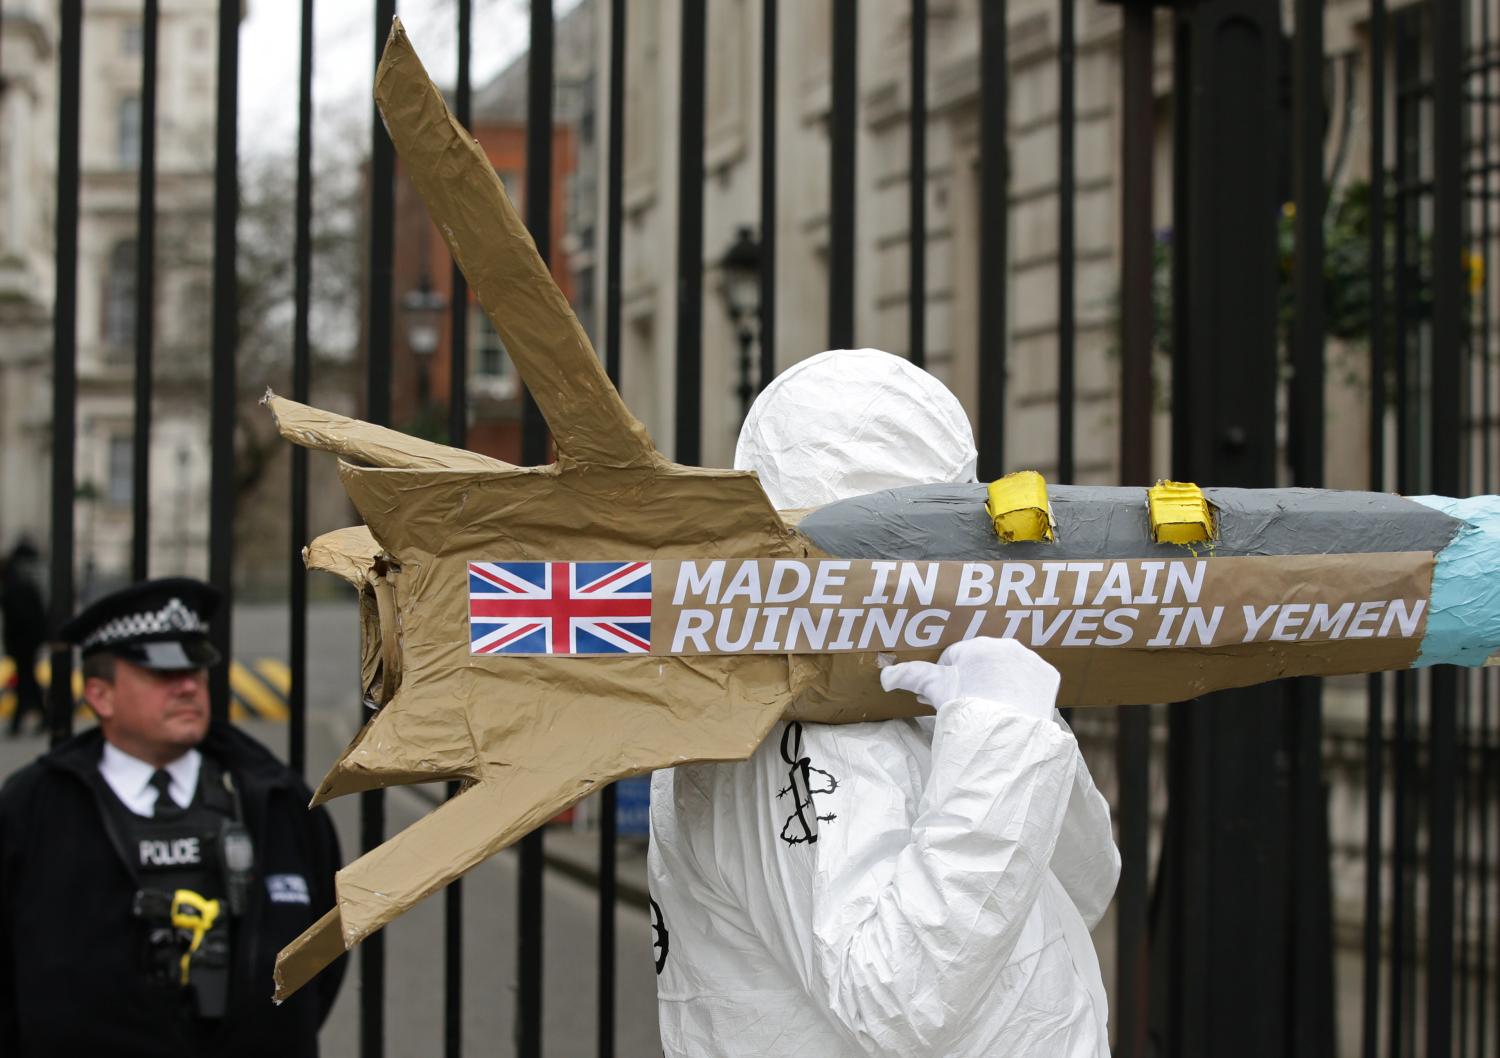 Campaigners from Amnesty International carrying a batch of five giant dummy missiles to Downing Street in London, to highlight the UK governmentâs refusal to halt exports of UK-manufactured arms to Saudi Arabia, despite the clear risk that they could be used to commit war crimes in Yemen.